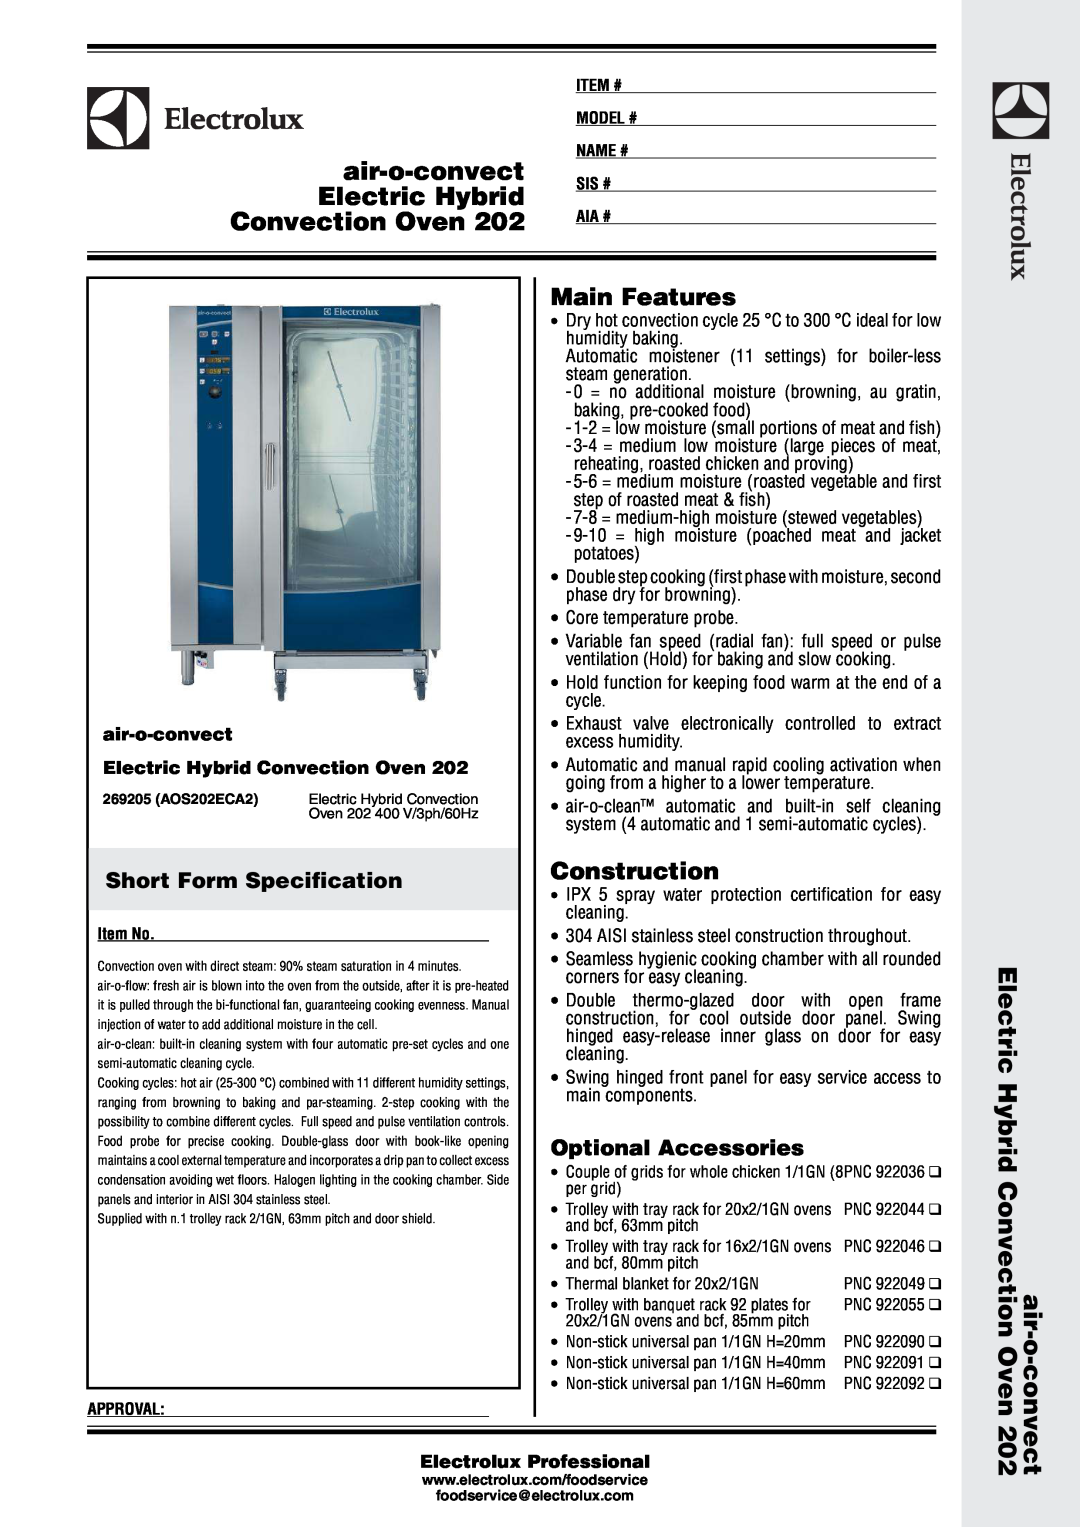 Electrolux 202 manual air-o-steam class B Natural Gas Combi Oven, Short Form Specification, Main Features 